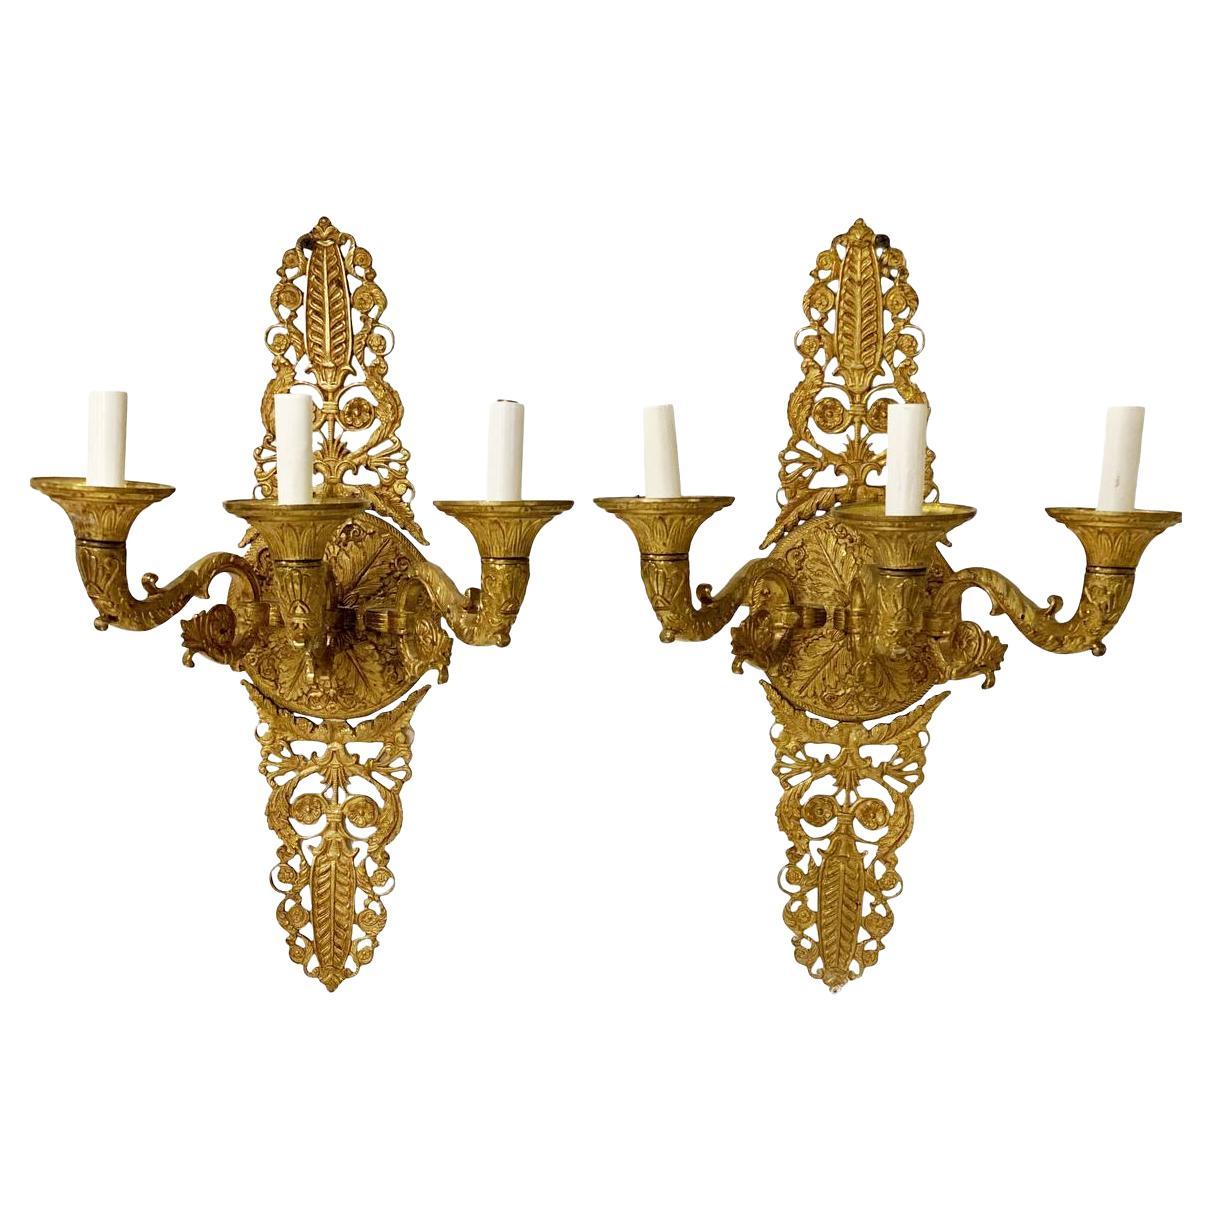 1920s French Empire Sconces with 3 lights For Sale